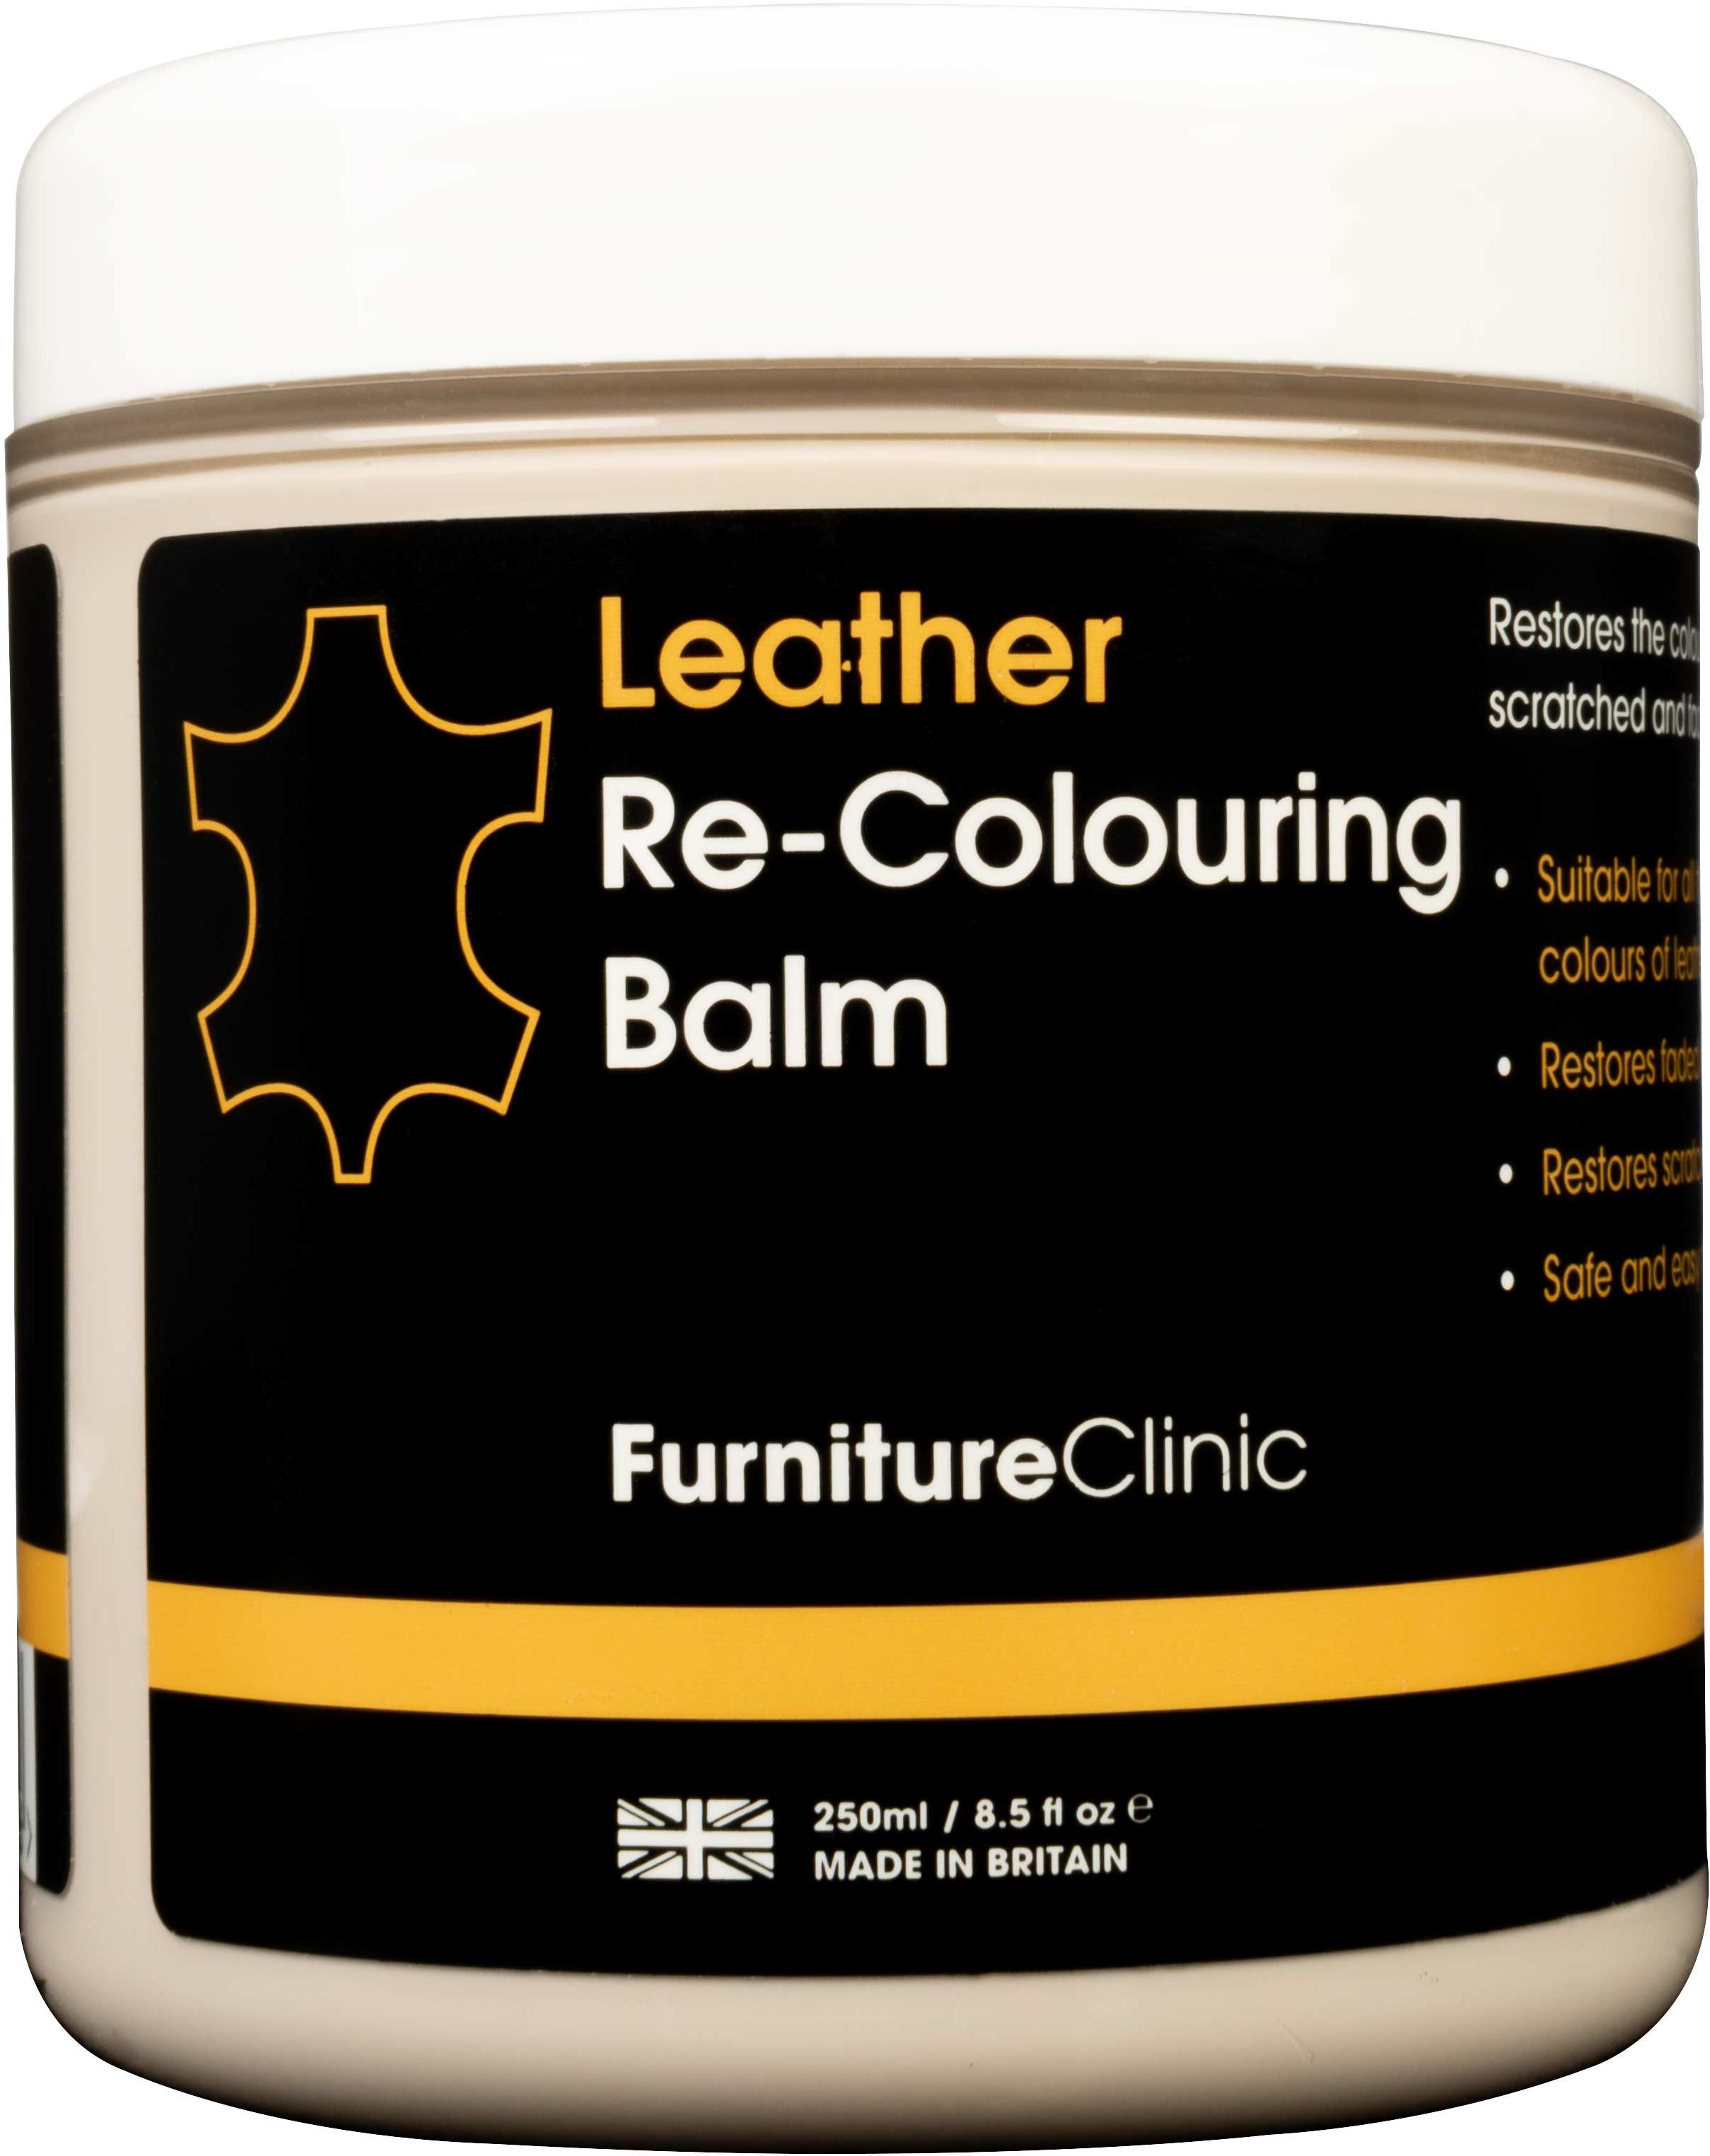 Furniture Clinic Leather Re-Colouring Balm balsam koloryzujący IVORY 250ml FUR000015